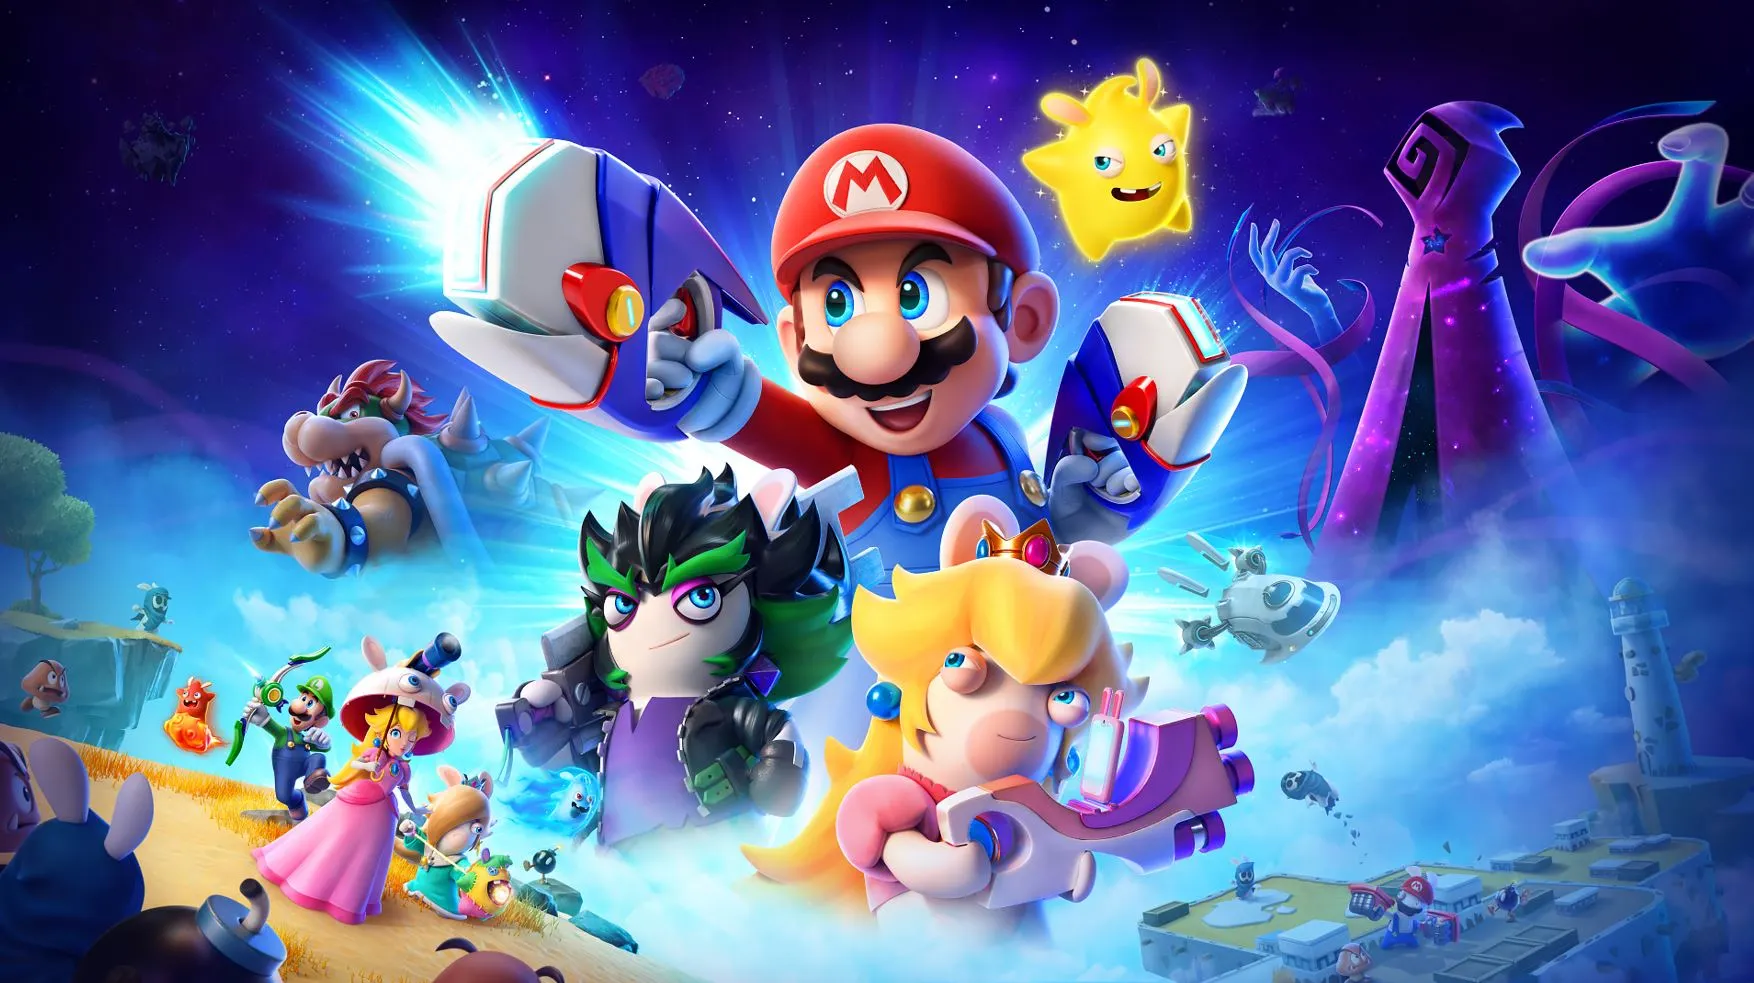 Rumours: the number of copies of Mario + Rabbids Sparks of Hope sold exceeds 3 million